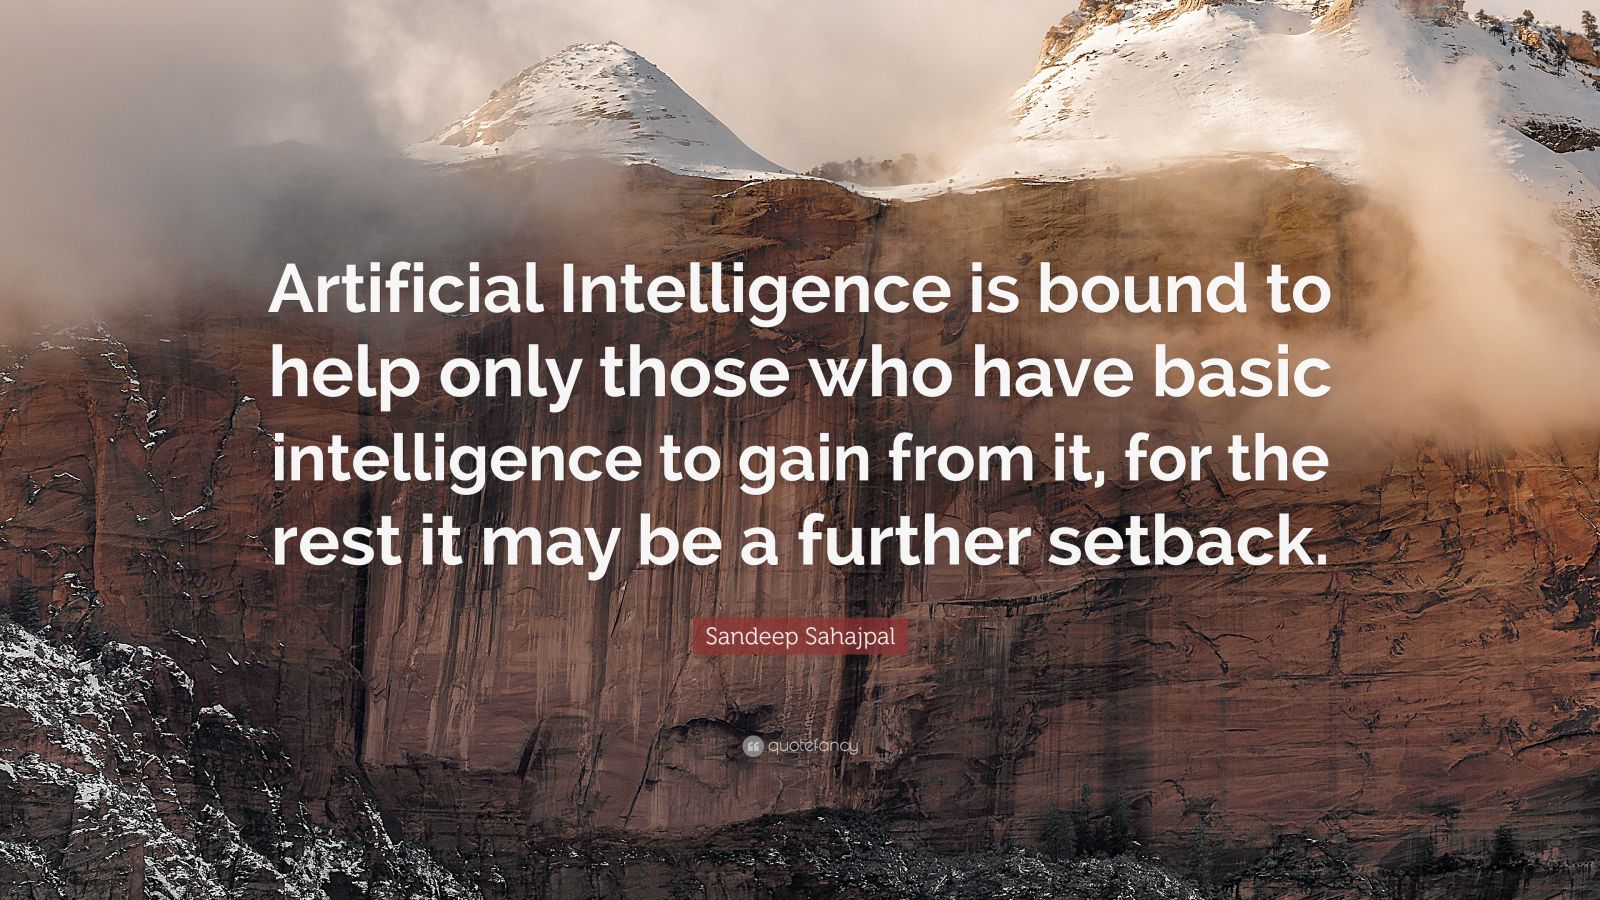 Sandeep Sahajpal Quote: “Artificial Intelligence is bound to help only ...